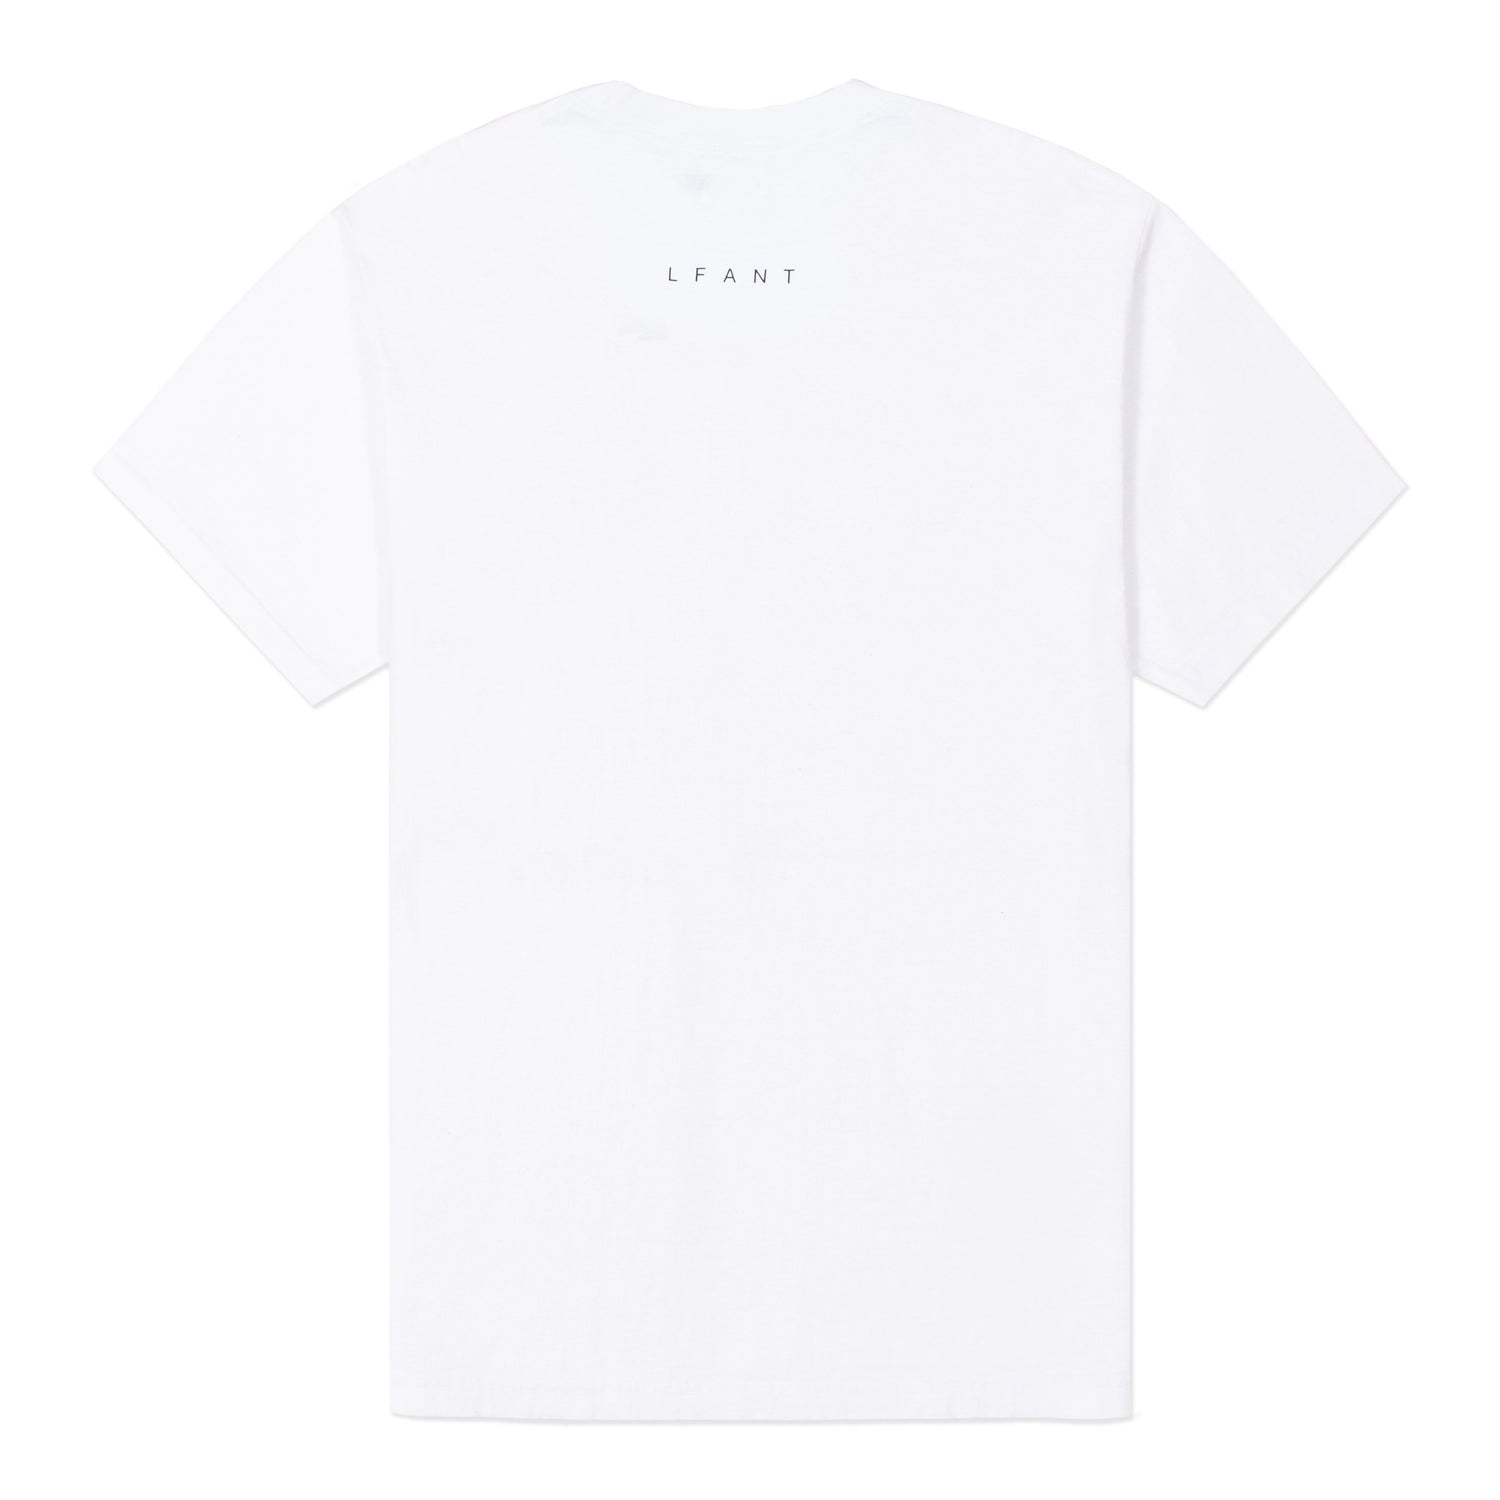 White t-shirt with "LFANT" on the back.